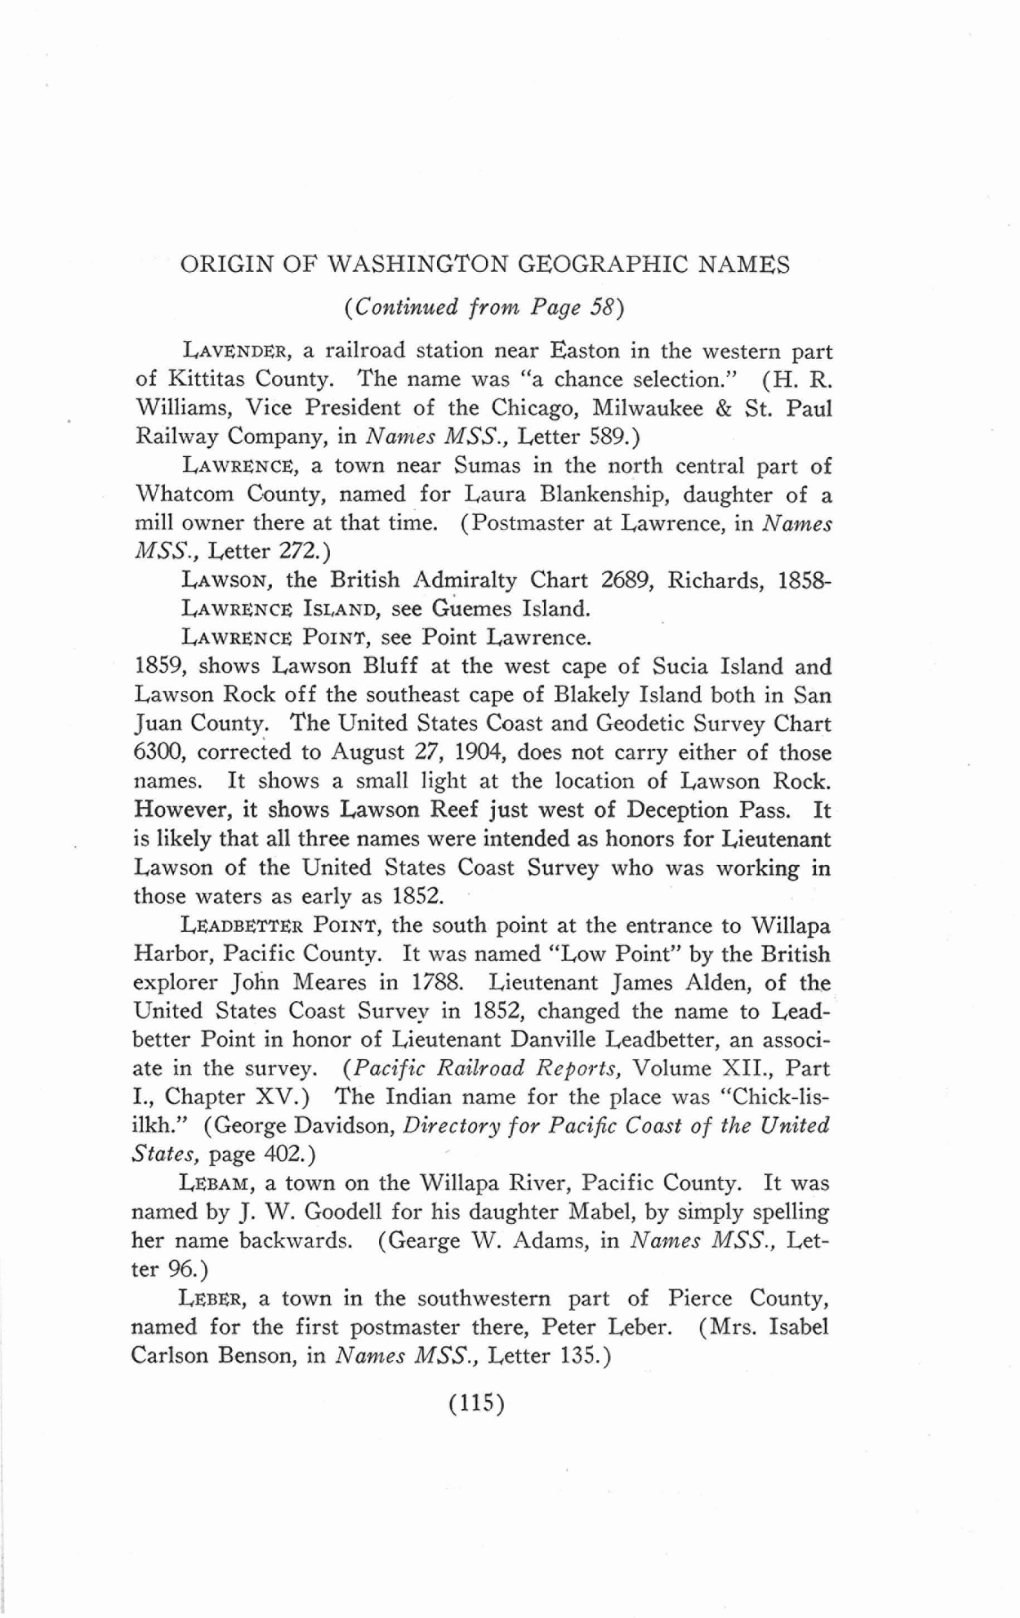 ORIGIN of WASHINGTON GEOGRAPHIC NAMES (Continued from Page 58) LAVENDER, a Railroad Station Near Easton in the Western Part of Kittitas County